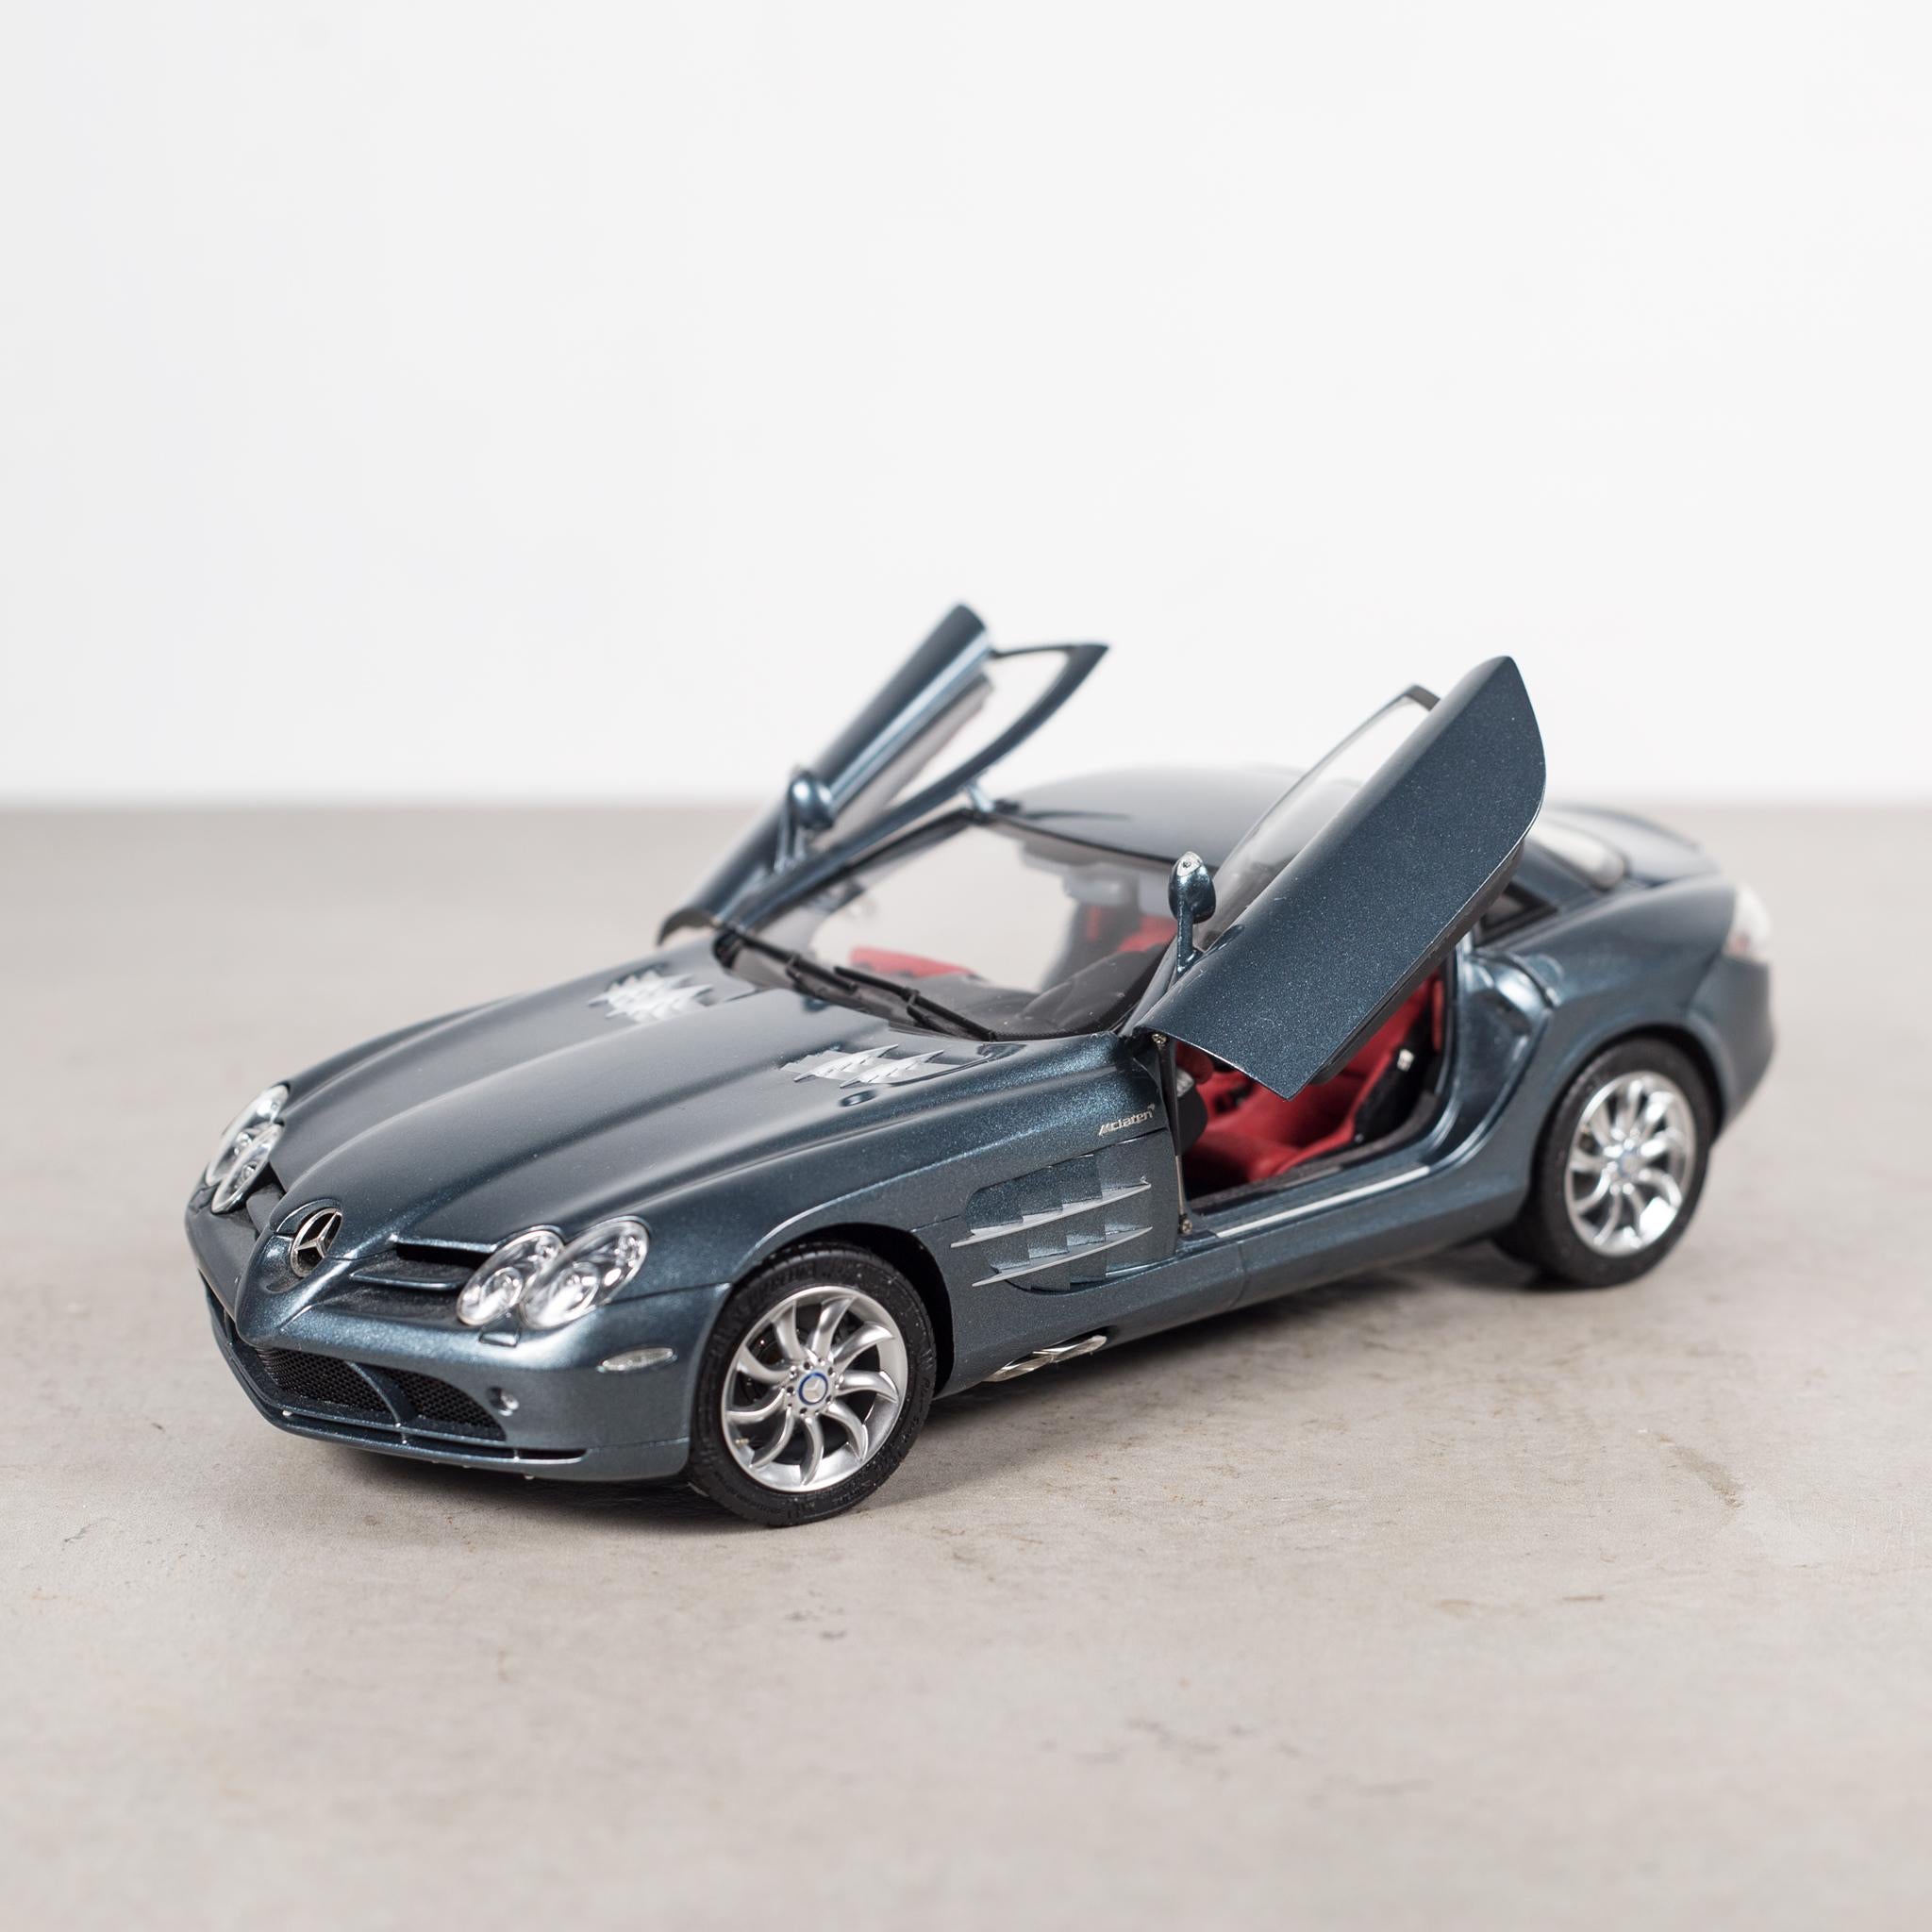 About

An exact replica of the Mecedes-Benz SLR McLaren Model. 1:18 scale. Diecast, precision metal model hand assembled. Original box.
Model details:

 Handmounted full metal model. Built of more than 895 parts
 Interior, especially for the